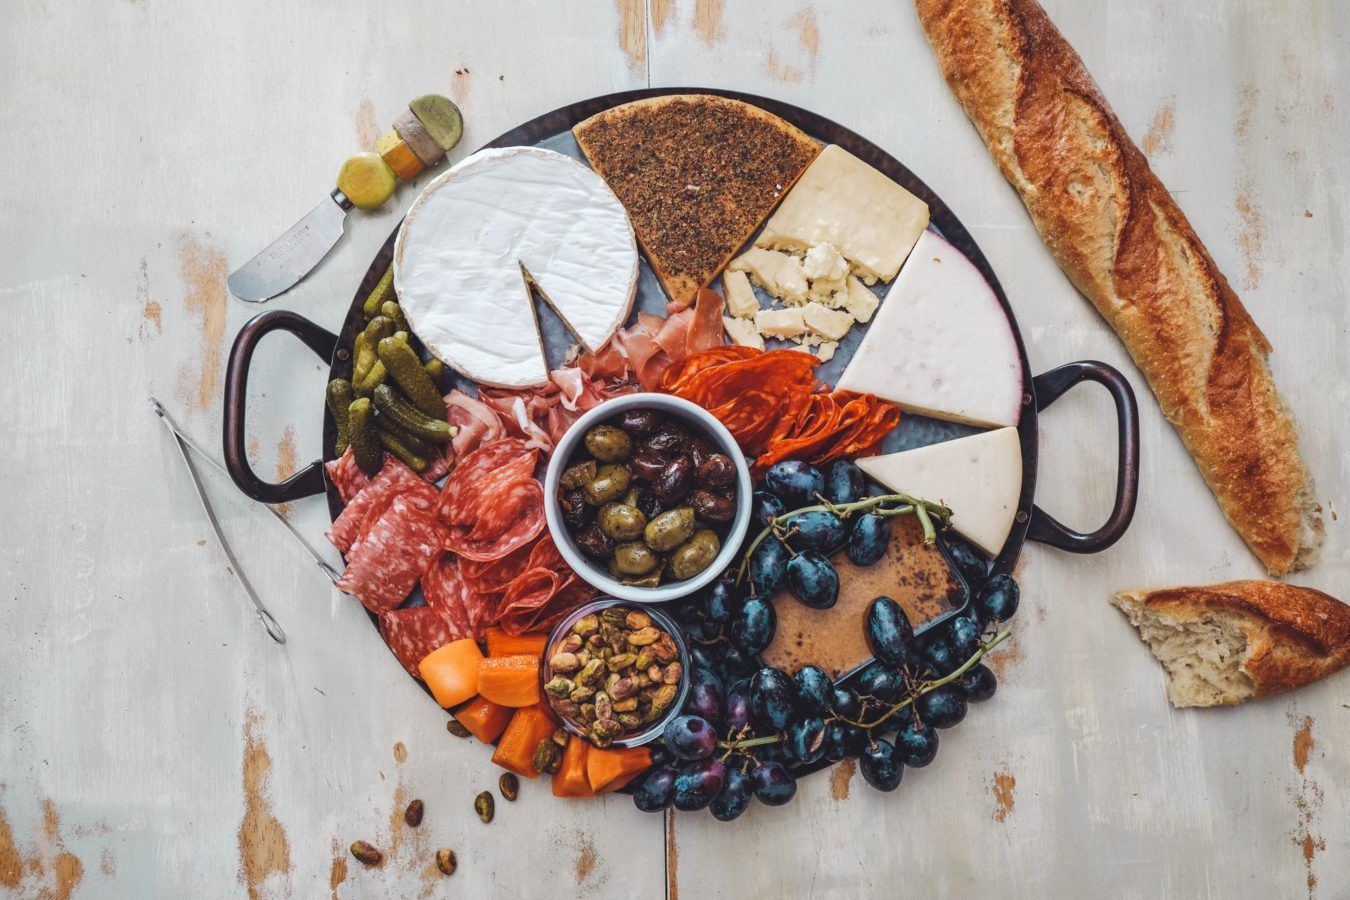 Everything you’ll need to build a beautiful vegan cheese board